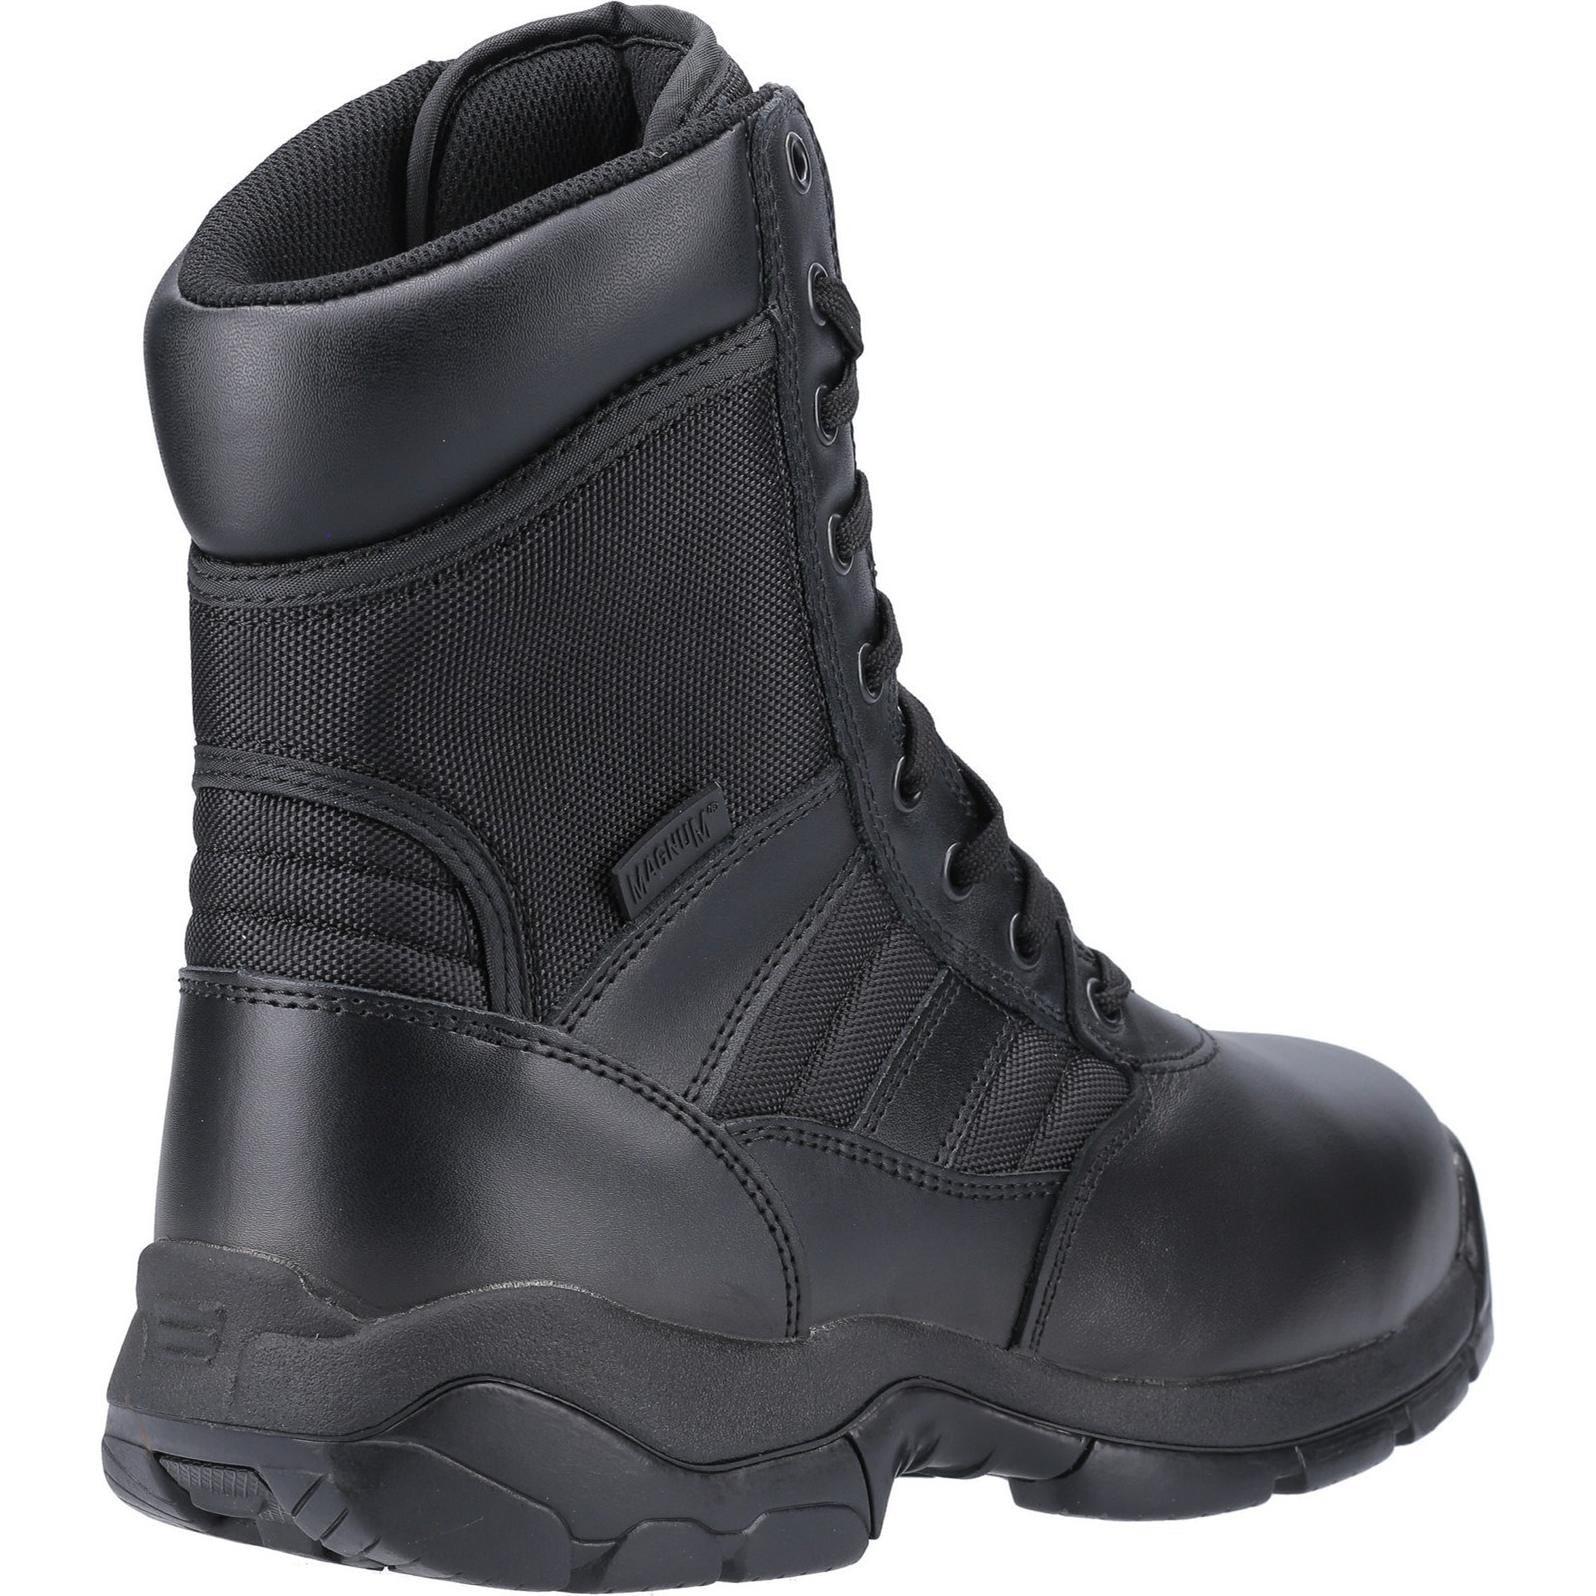 Magnum Panther 8.0 Steel-Toe Uniform Safety Boot